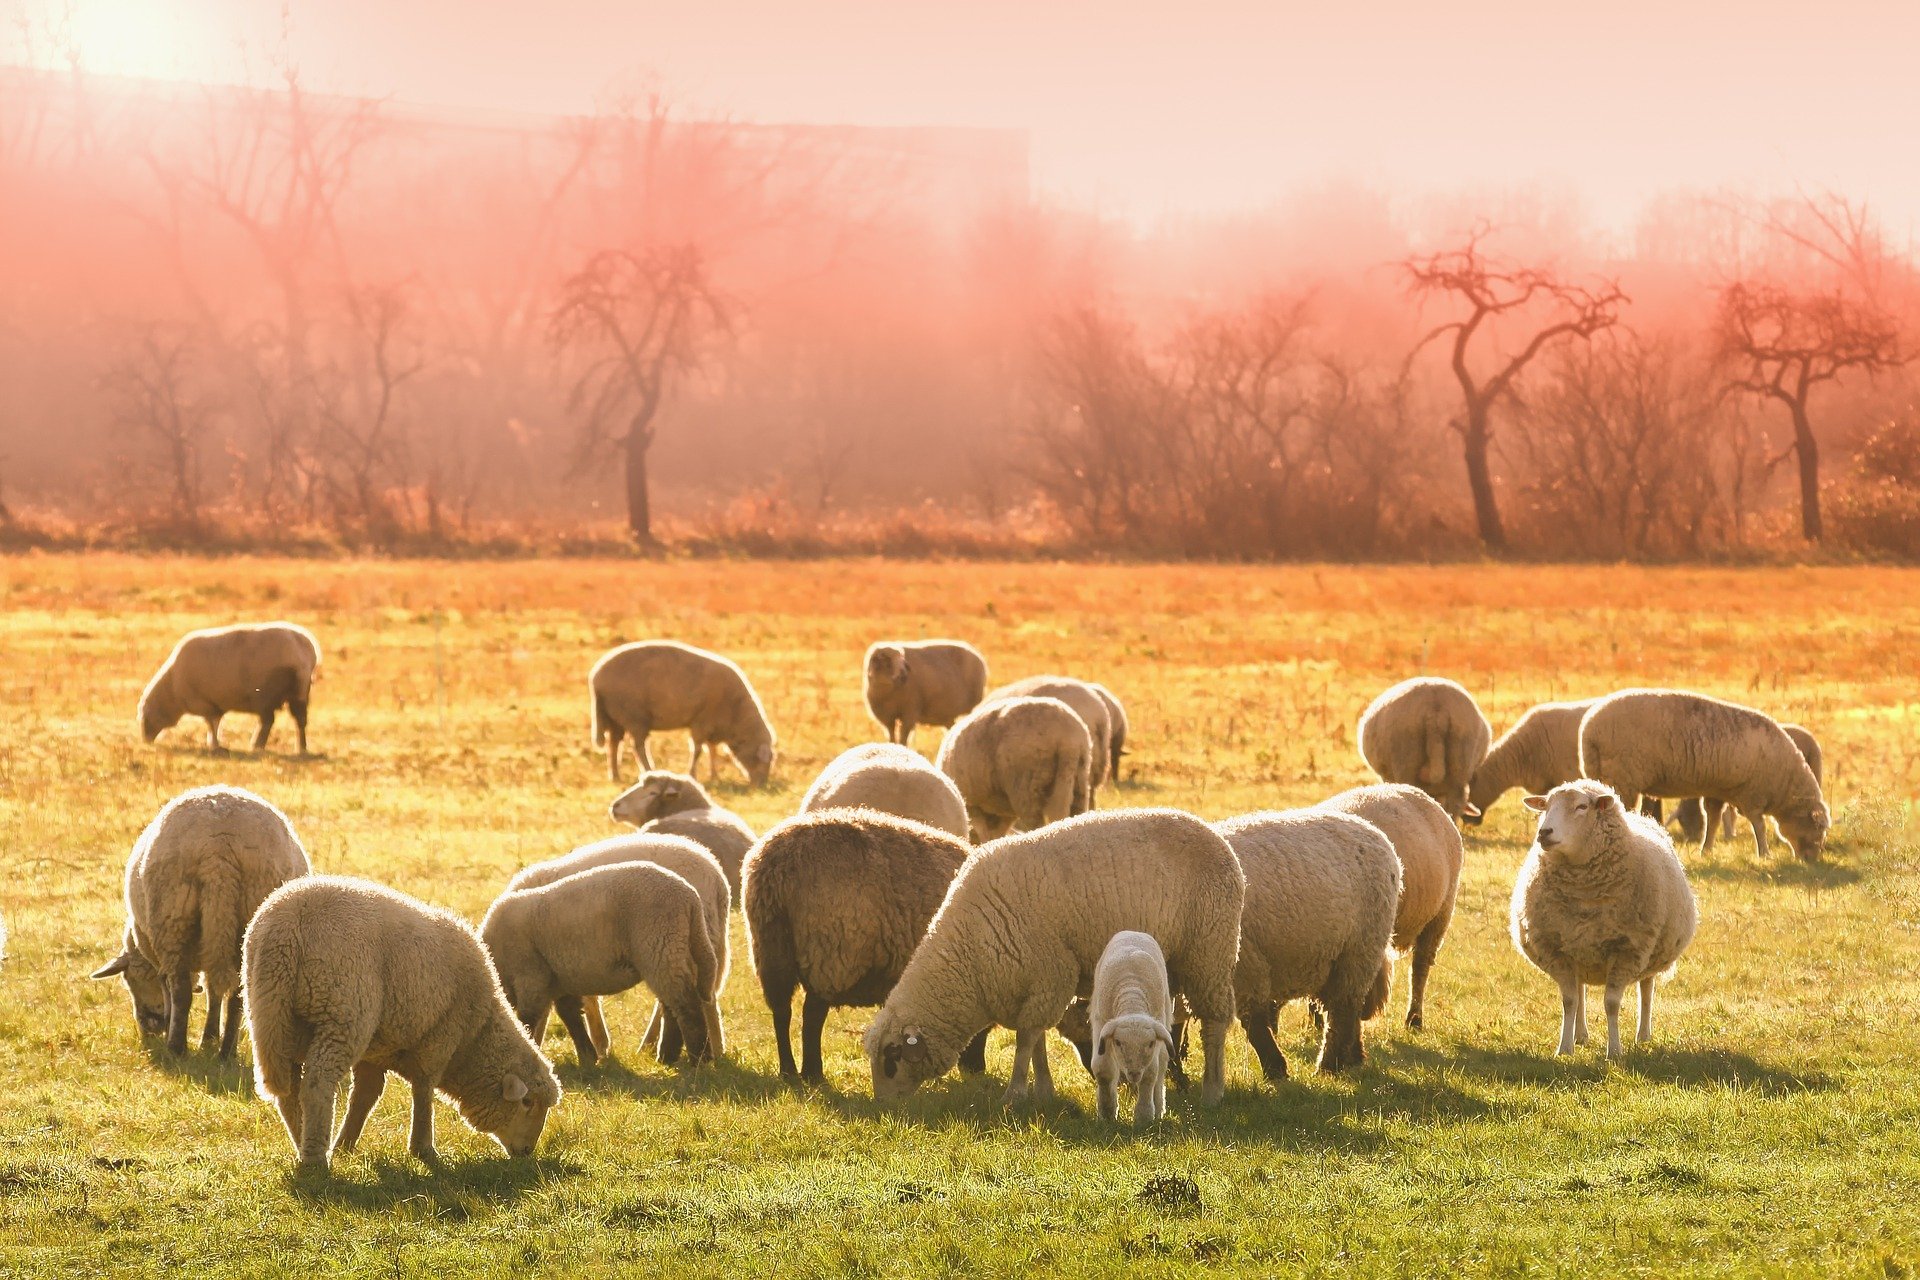 sheep grazing in a field at sunset